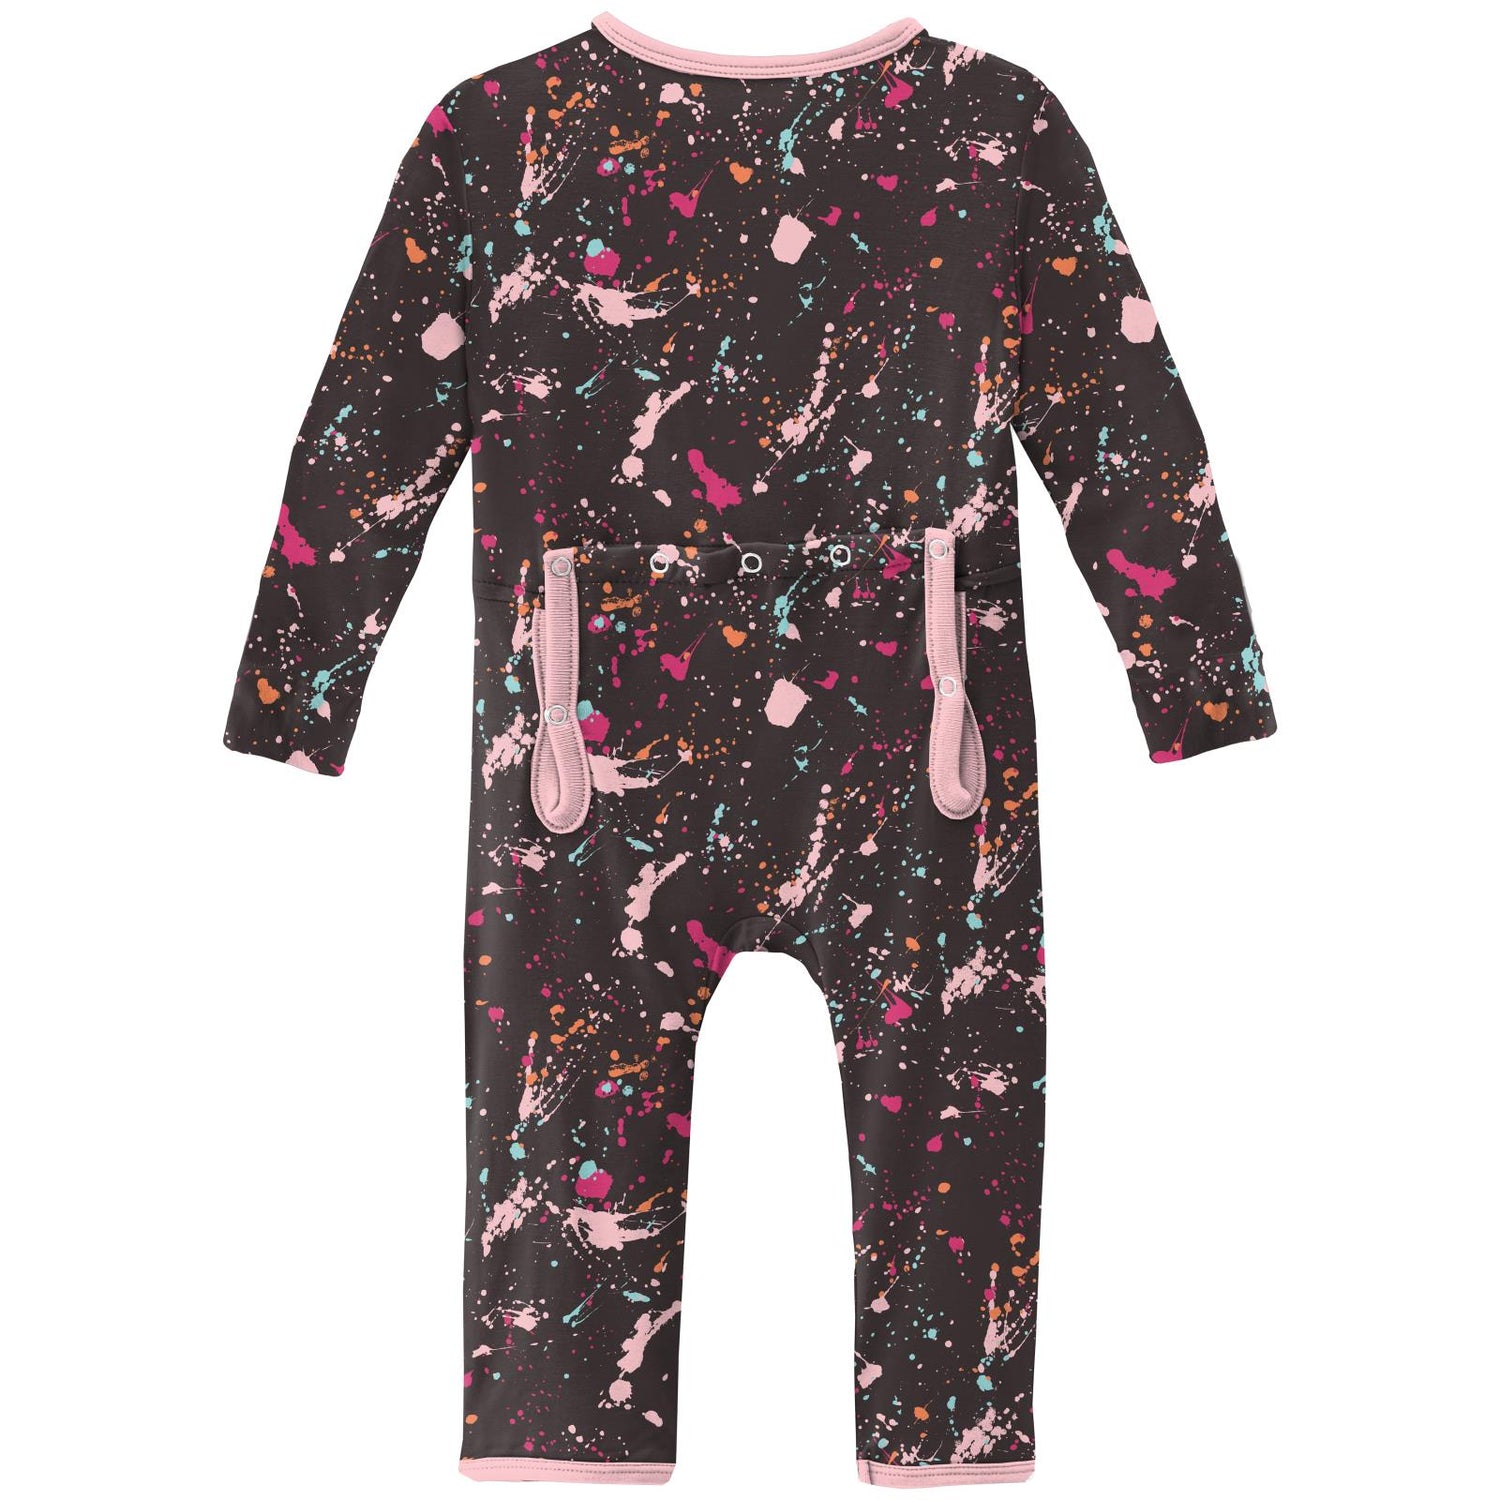 Print Coverall with 2 Way Zipper in Calypso Splatter Paint